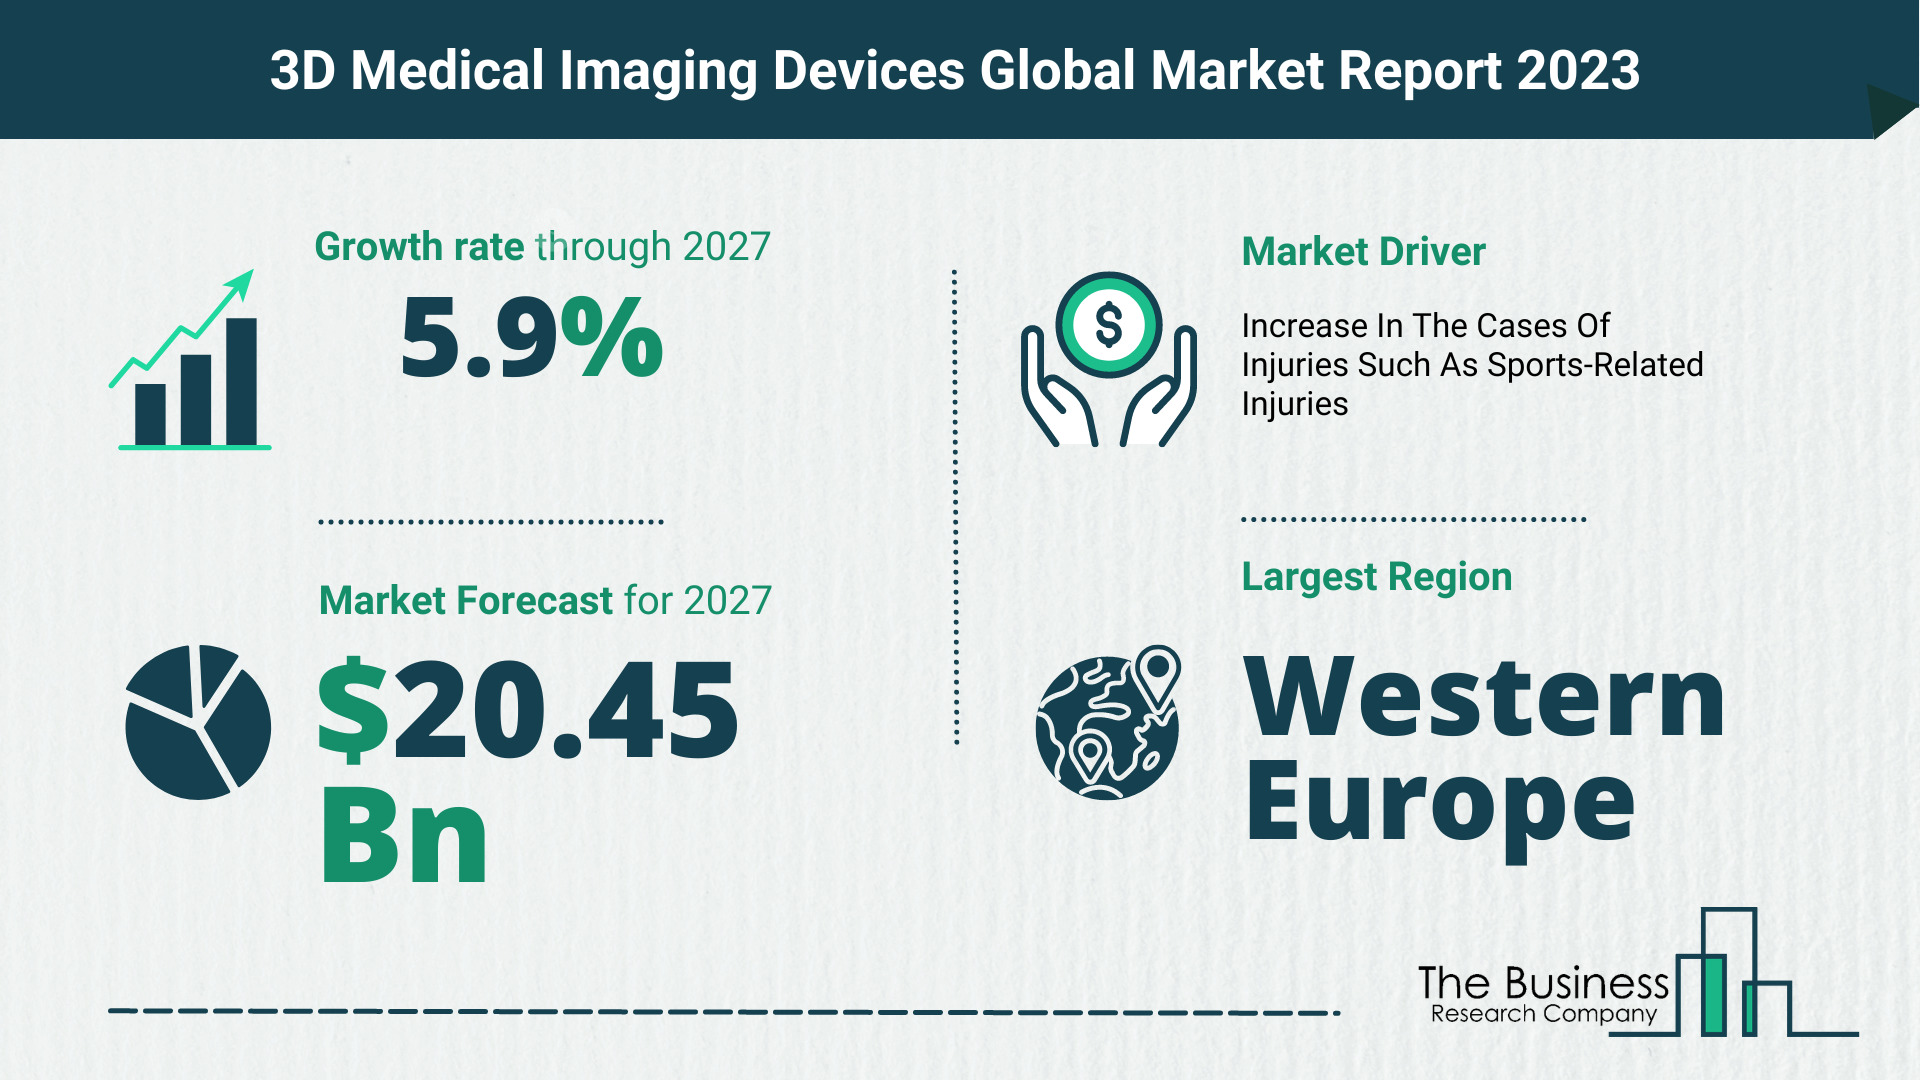 Global 3D Medical Imaging Devices Market Opportunities And Strategies 2023